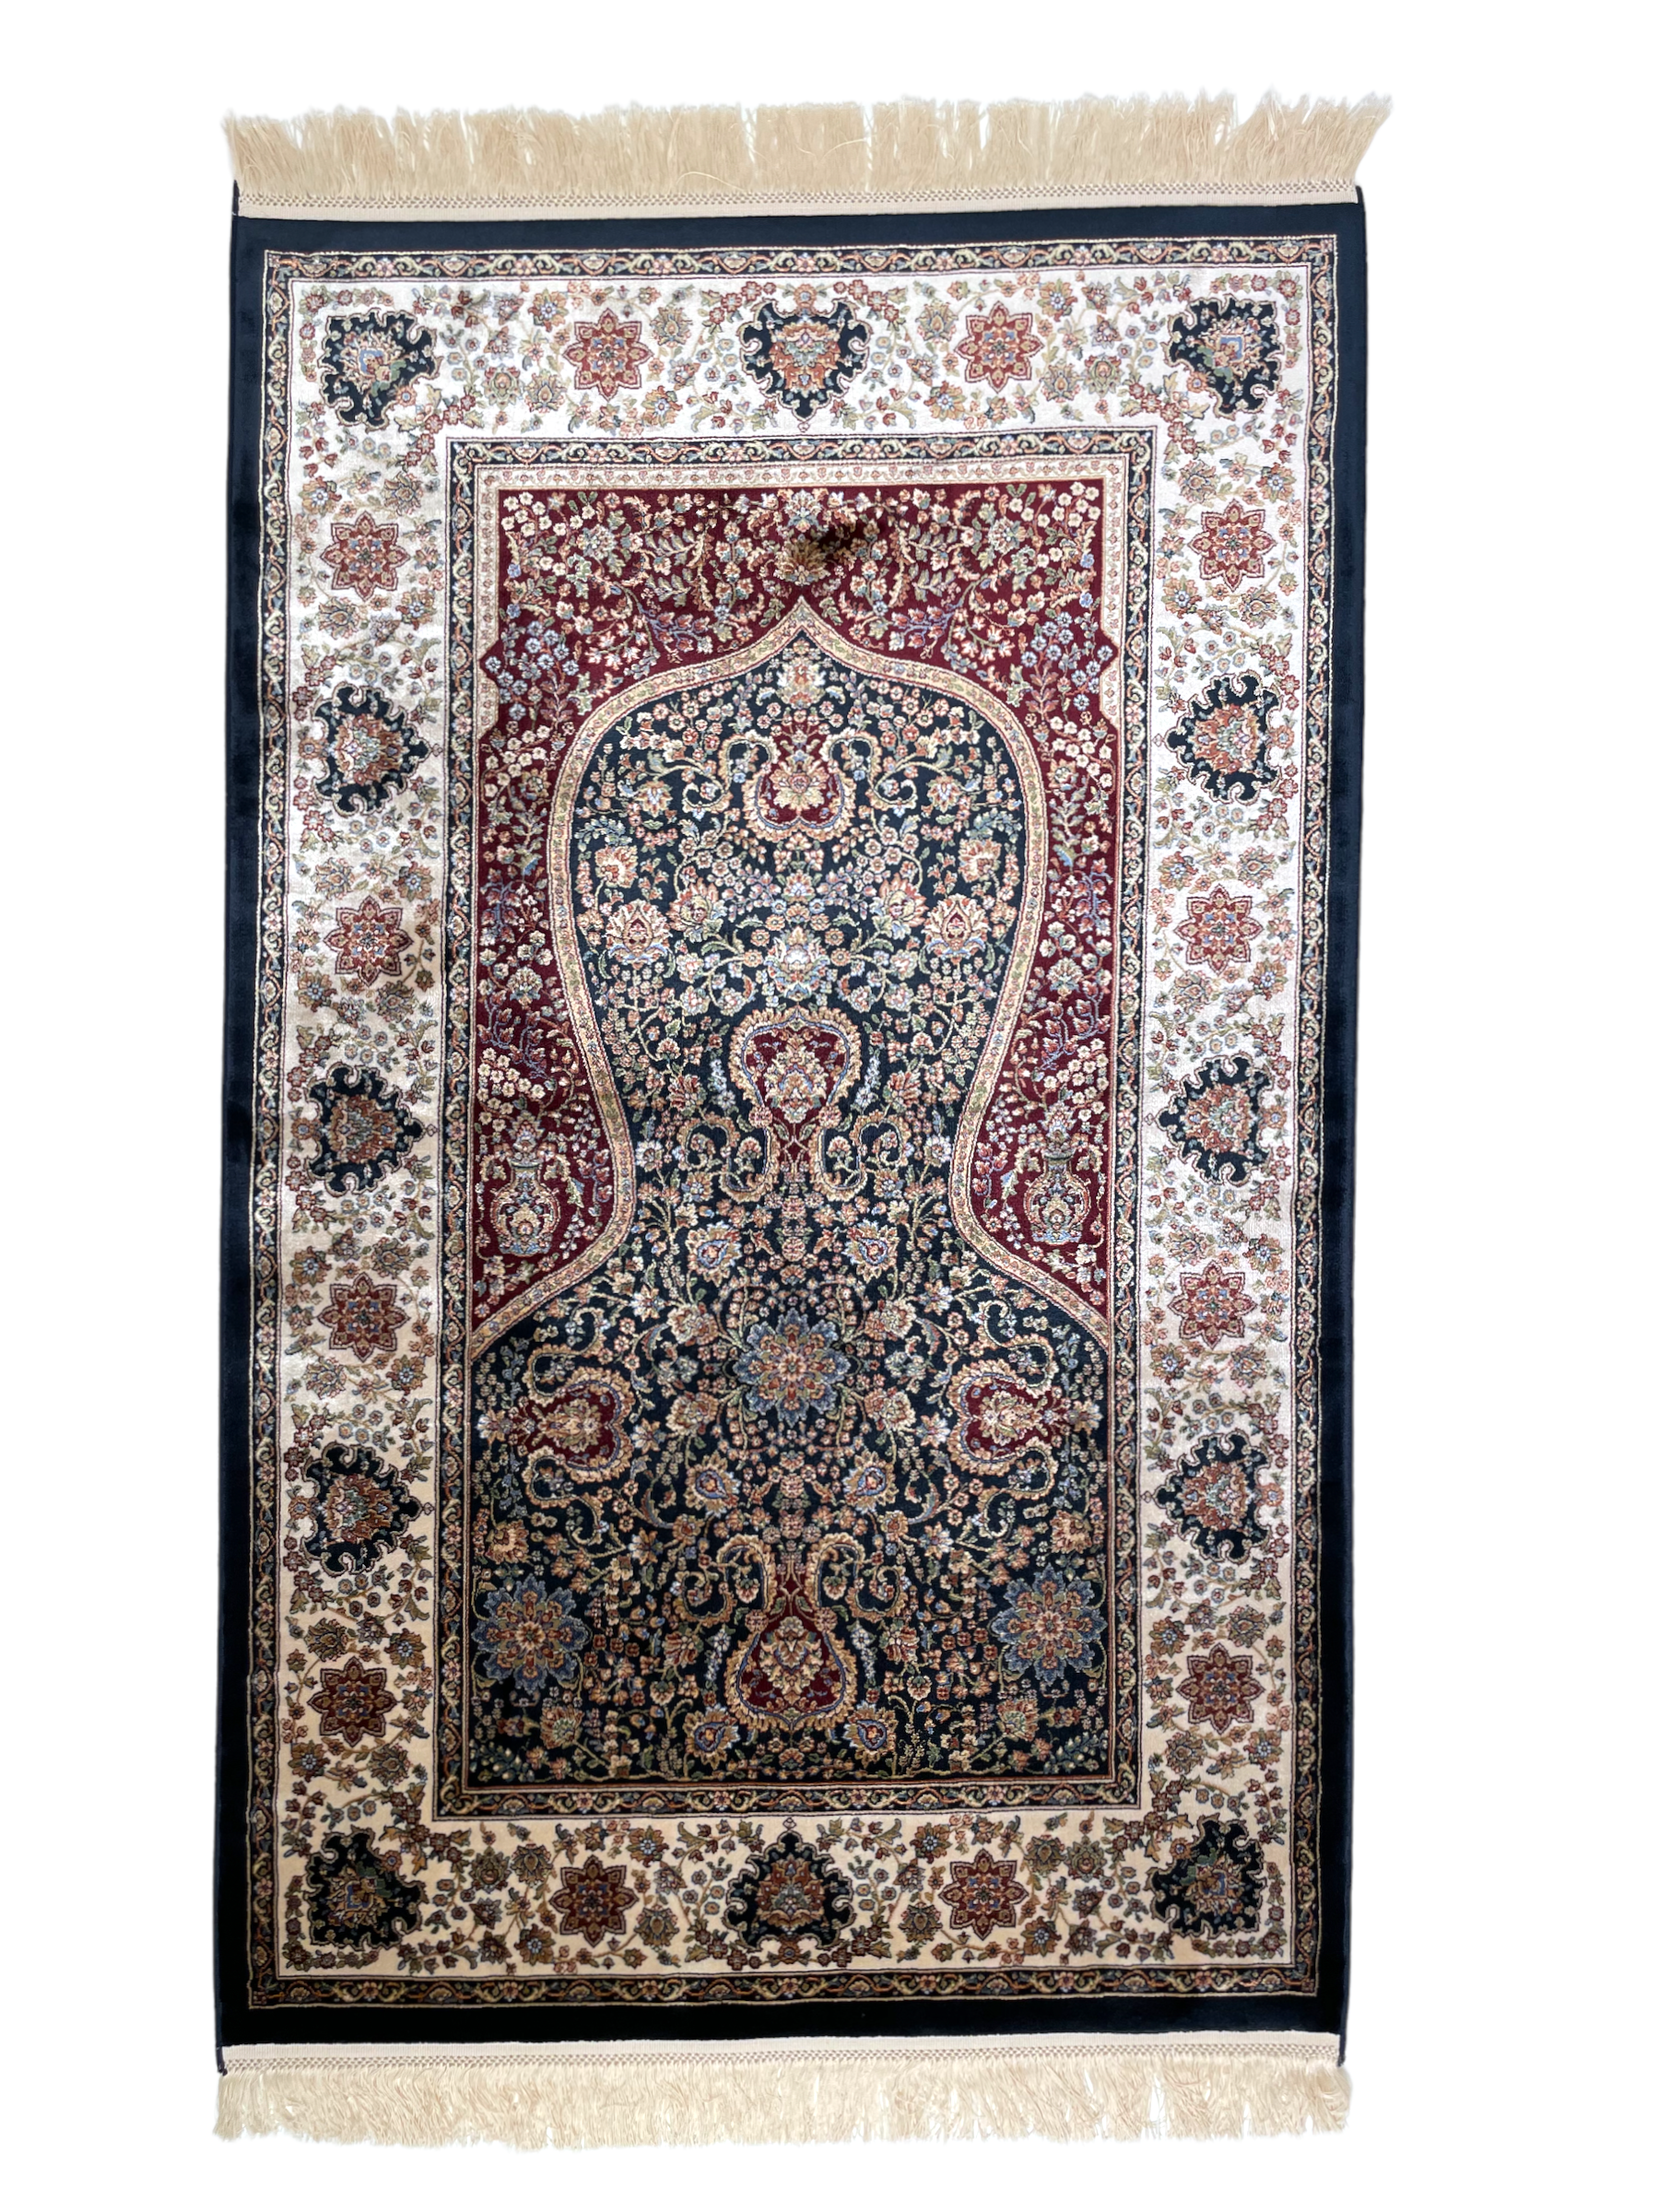 The Himma rug displays the traditional Islamic "mihrab" design with elegant floral elements. 